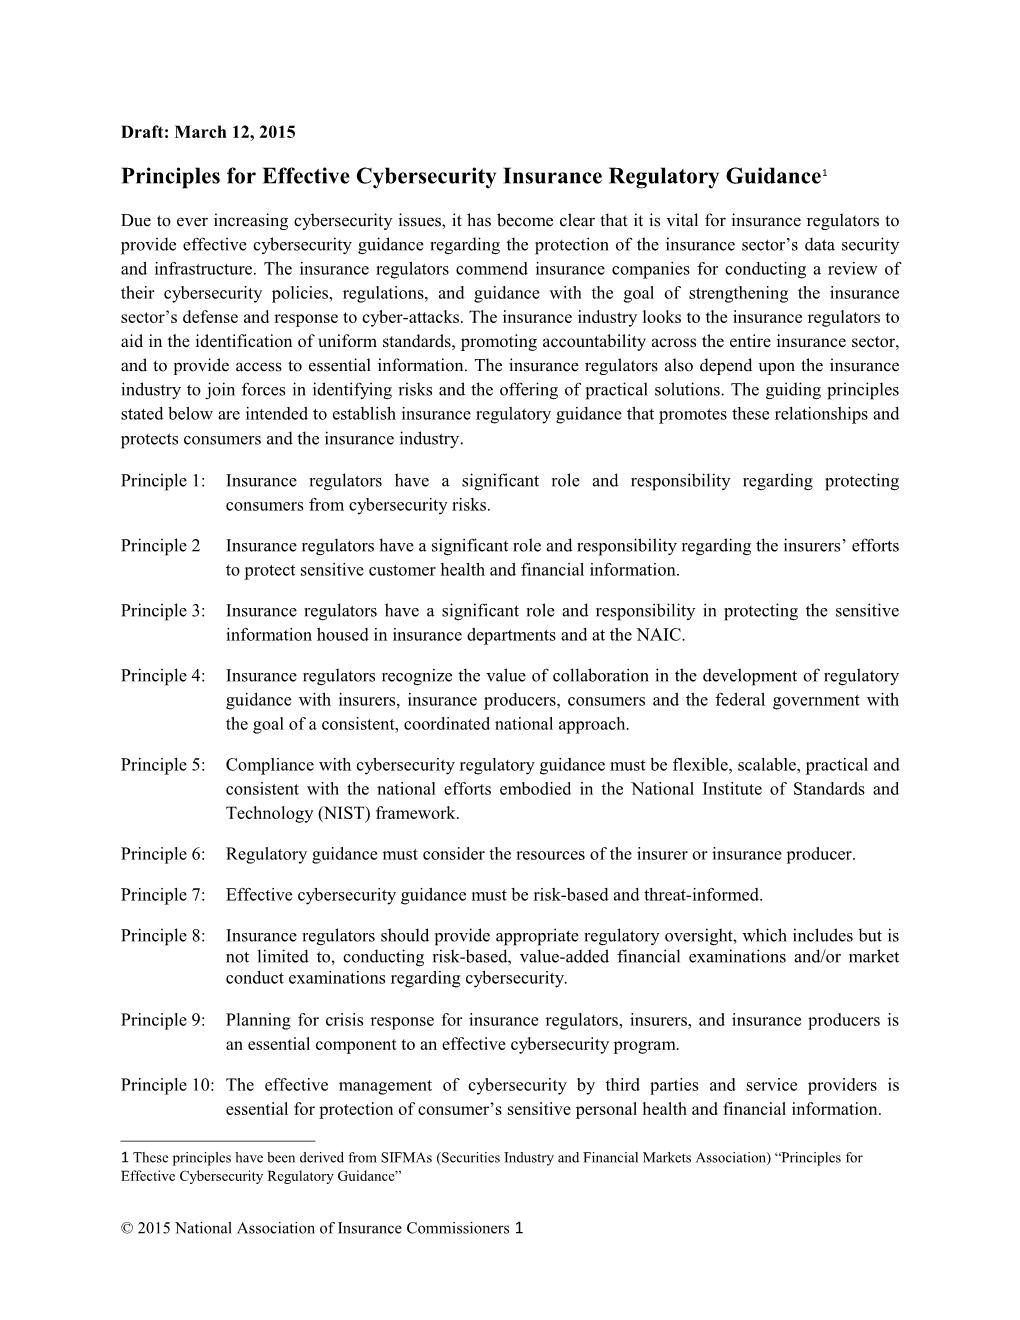 Principles for Effective Cybersecurity Insurance Regulatory Guidance 1